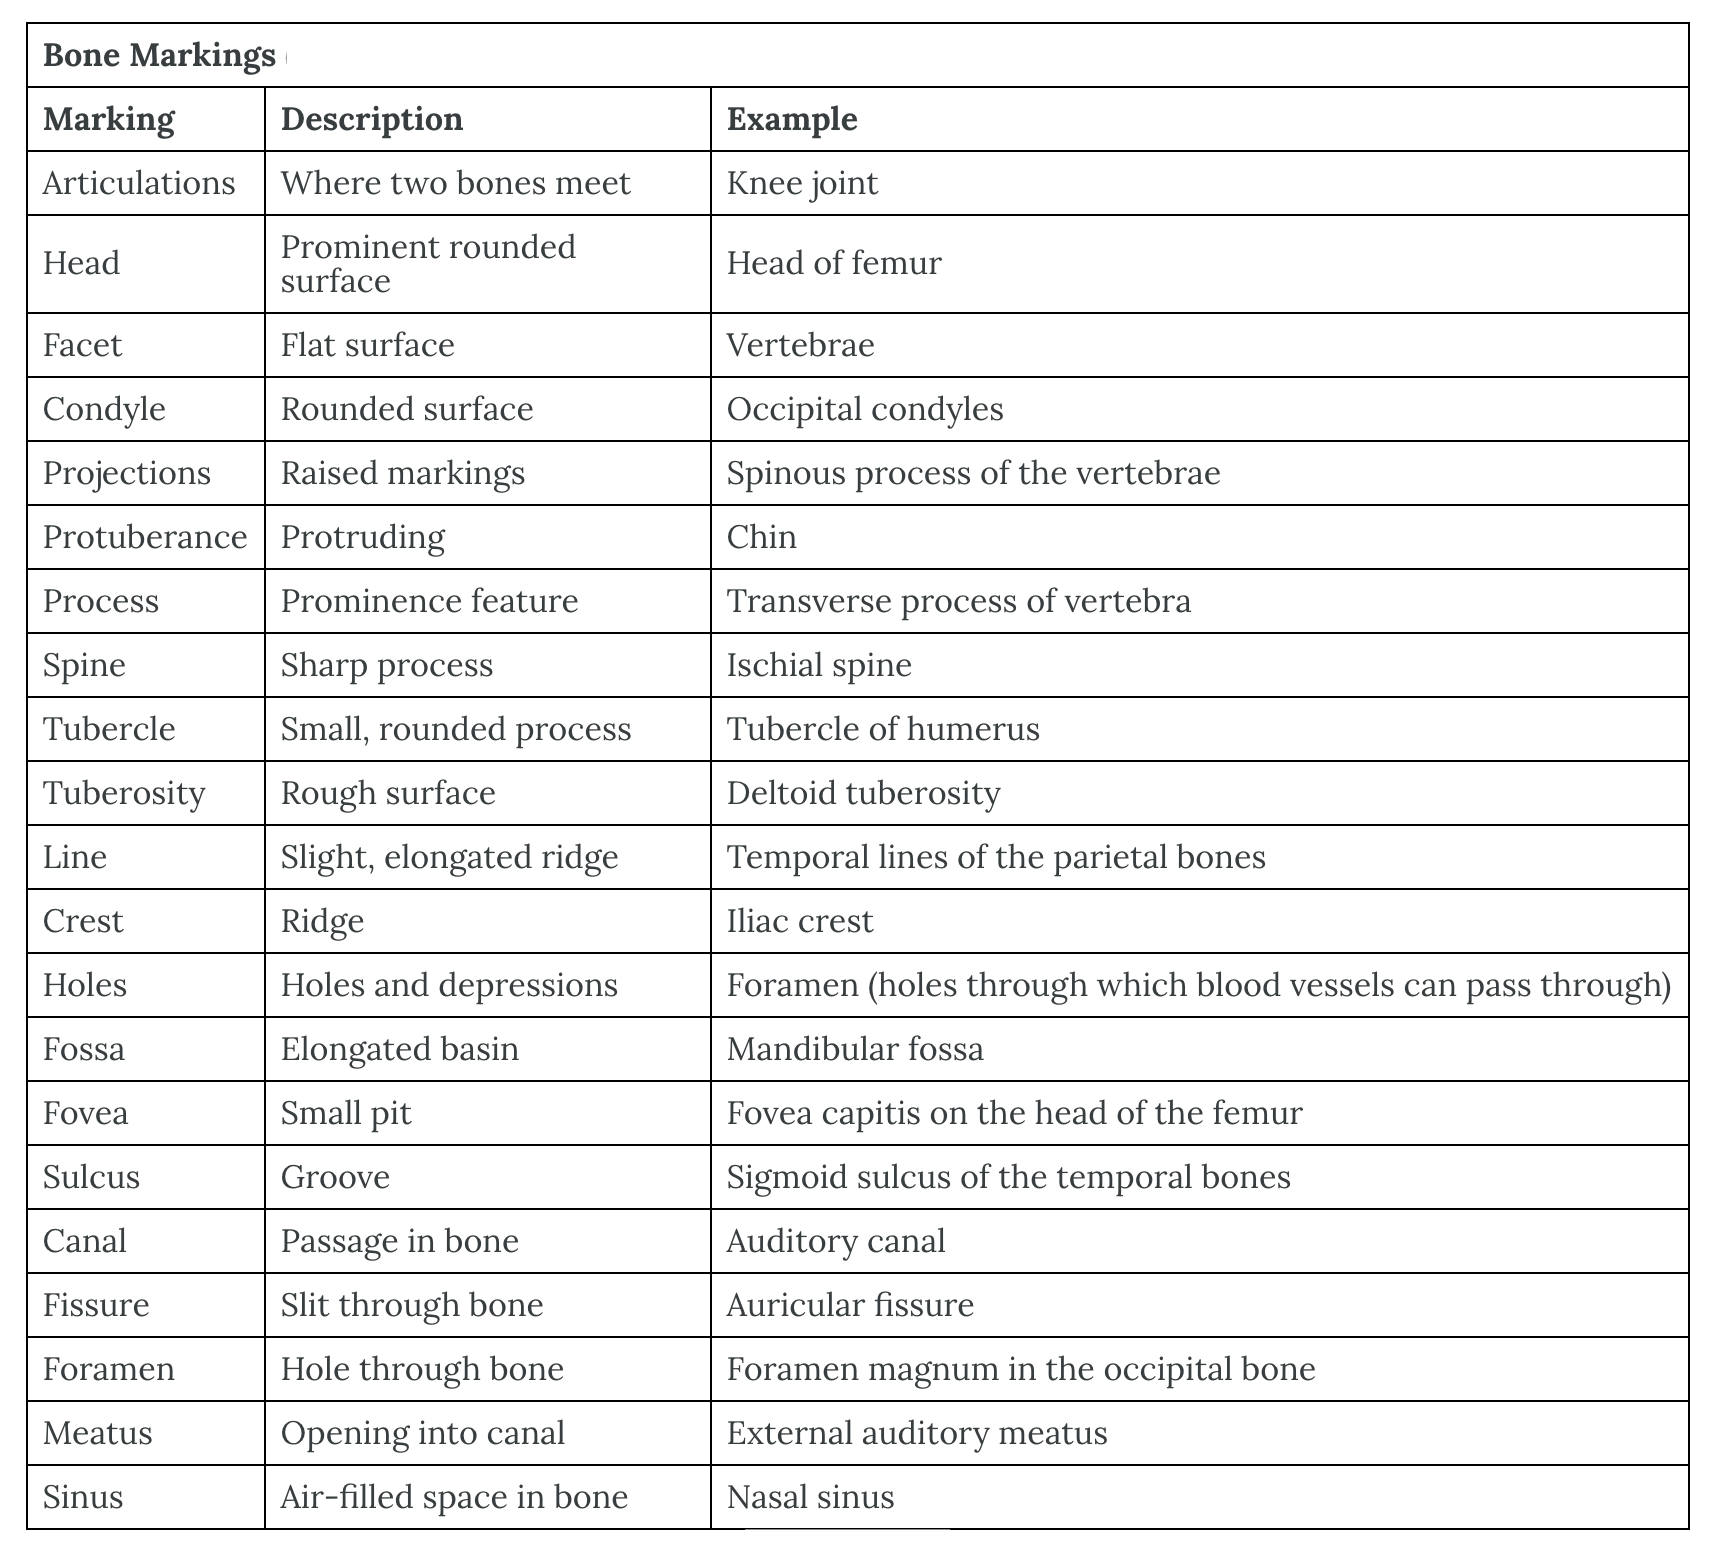 The image is of a table describing different bone markings and providing examples of the markings.